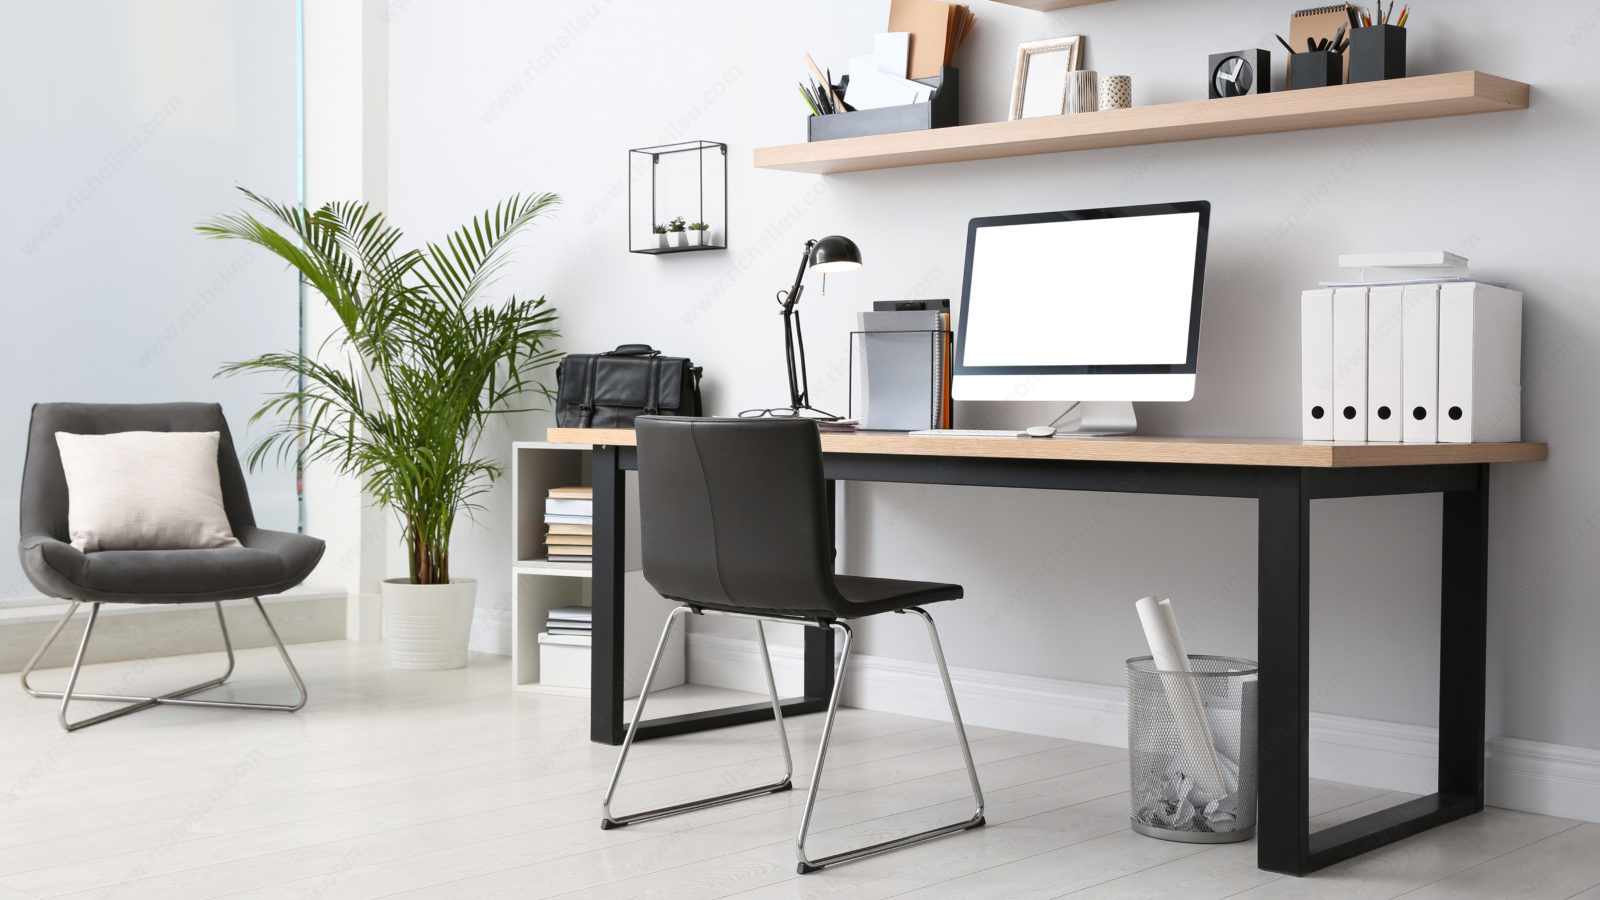 12 Essentials For Designing The Ultimate Home Office Space